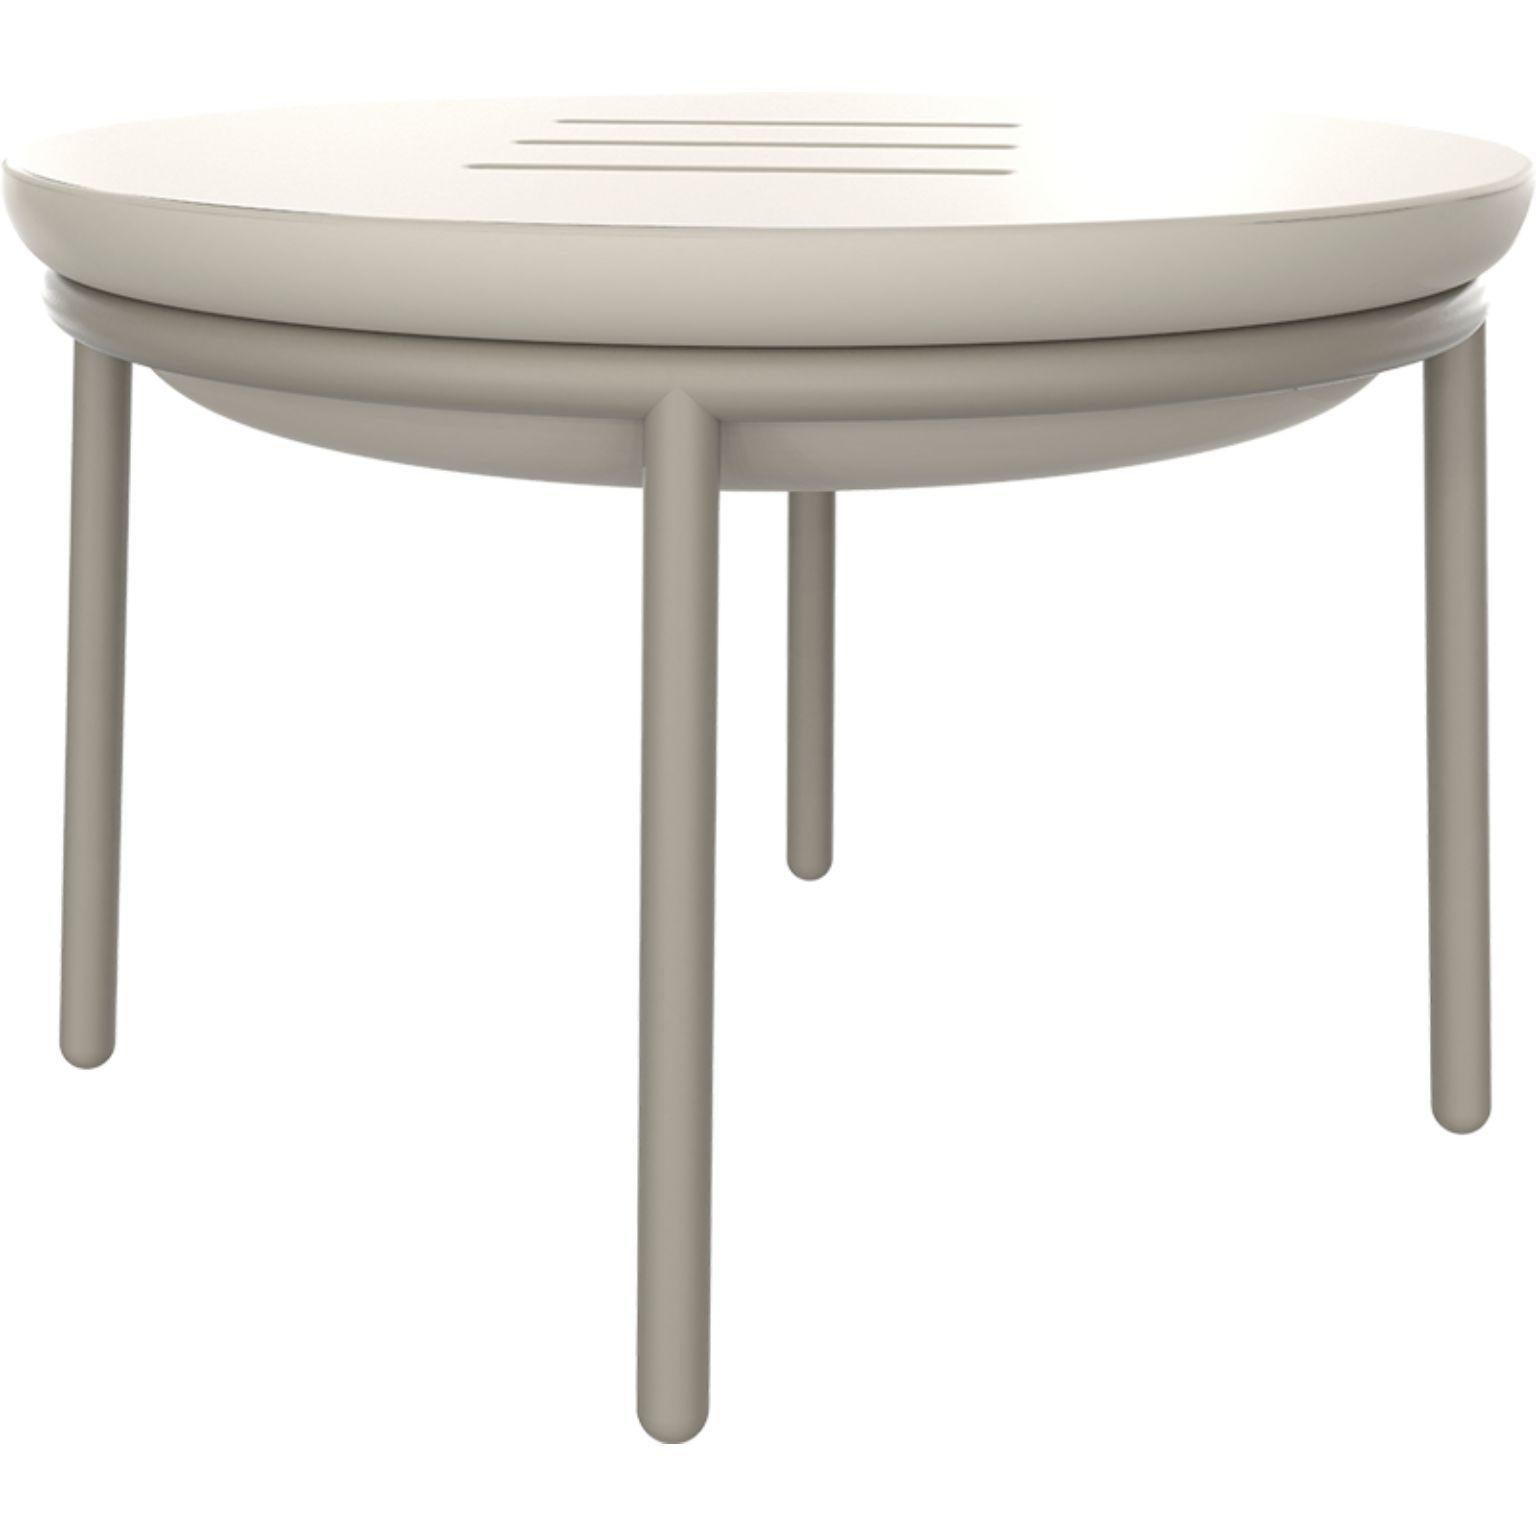 Lace cream 60 low table by MOWEE
Dimensions: Ø60 x H41 cm
Material: polyethylene and stainless steel.
Weight: 6.2 kg.
Also available in different colors and finishes (lacquered). 

Lace is a collection of furniture made by rotomoulding. Its